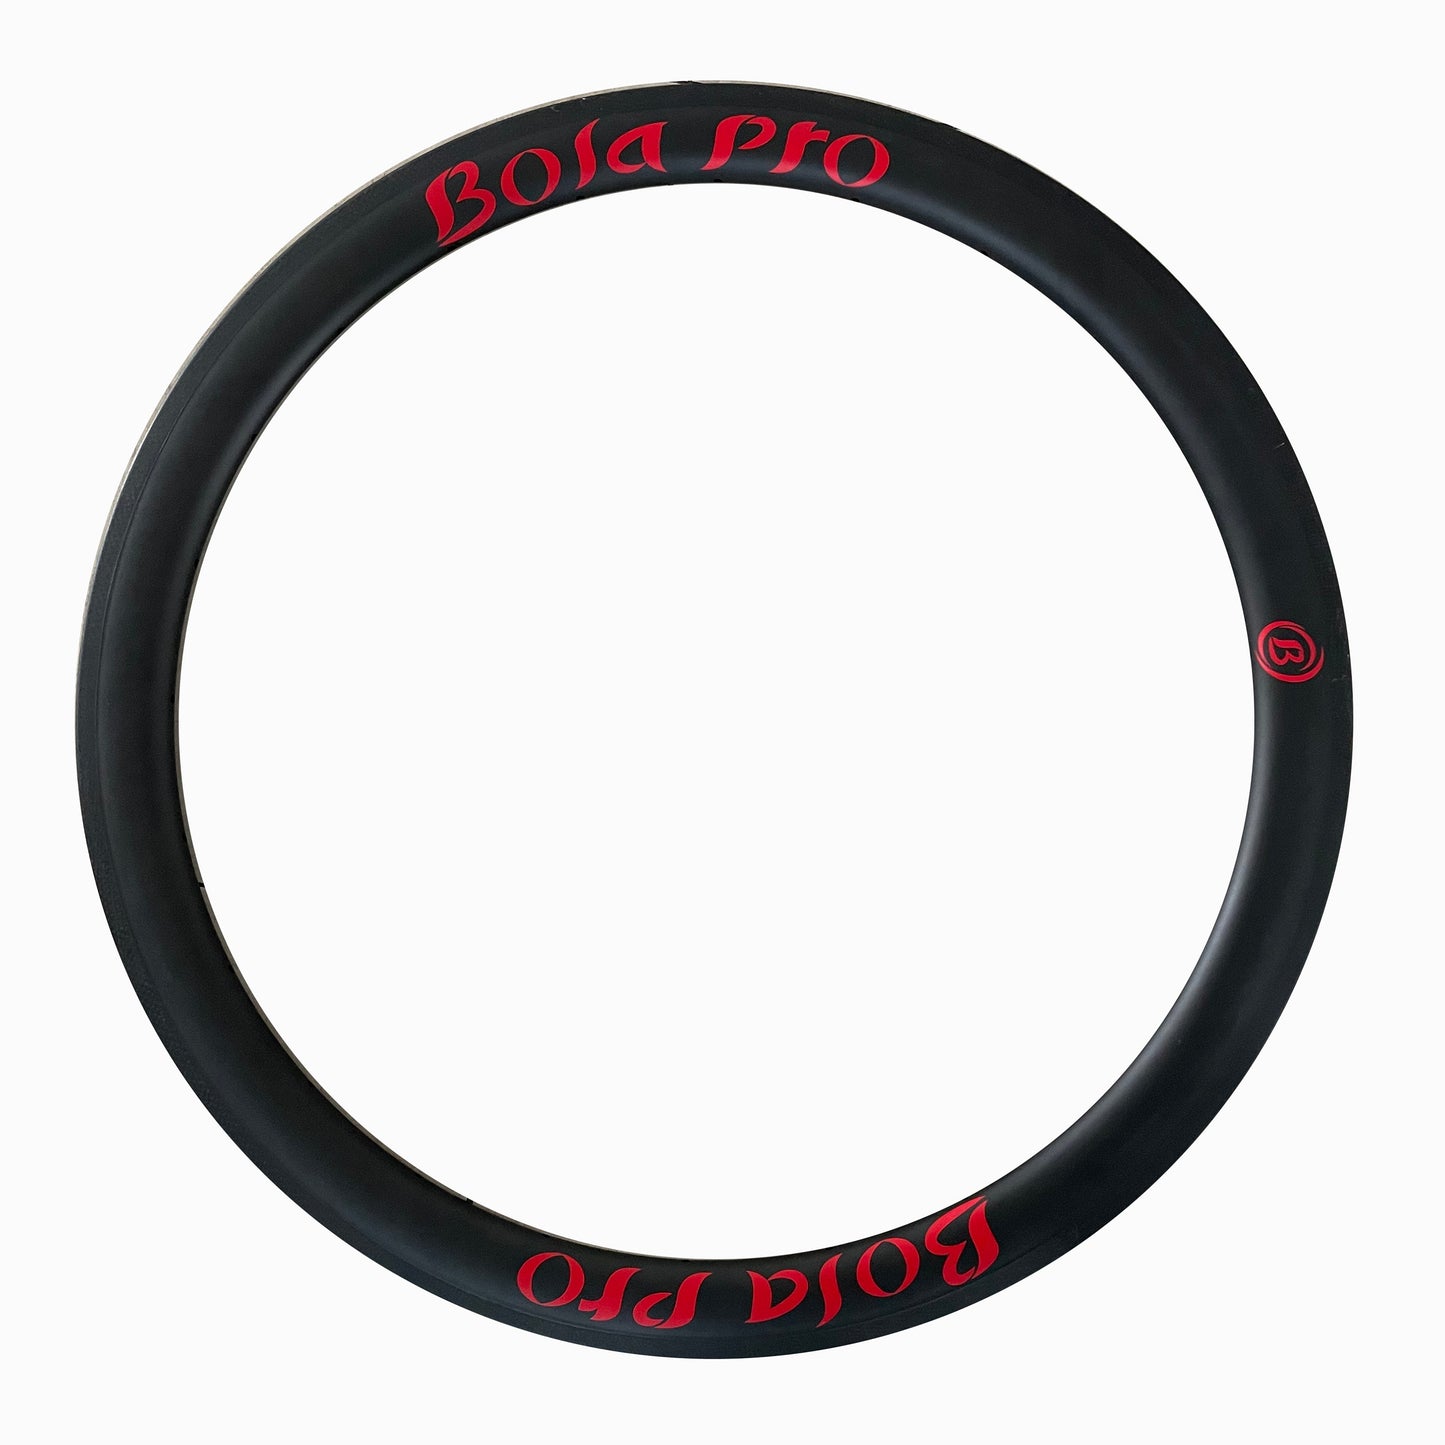 700c asymmetric tubeless ready bicicleta carbon wider rims 30mm low profile 30mm outer wide for gravel,hook or hookless design